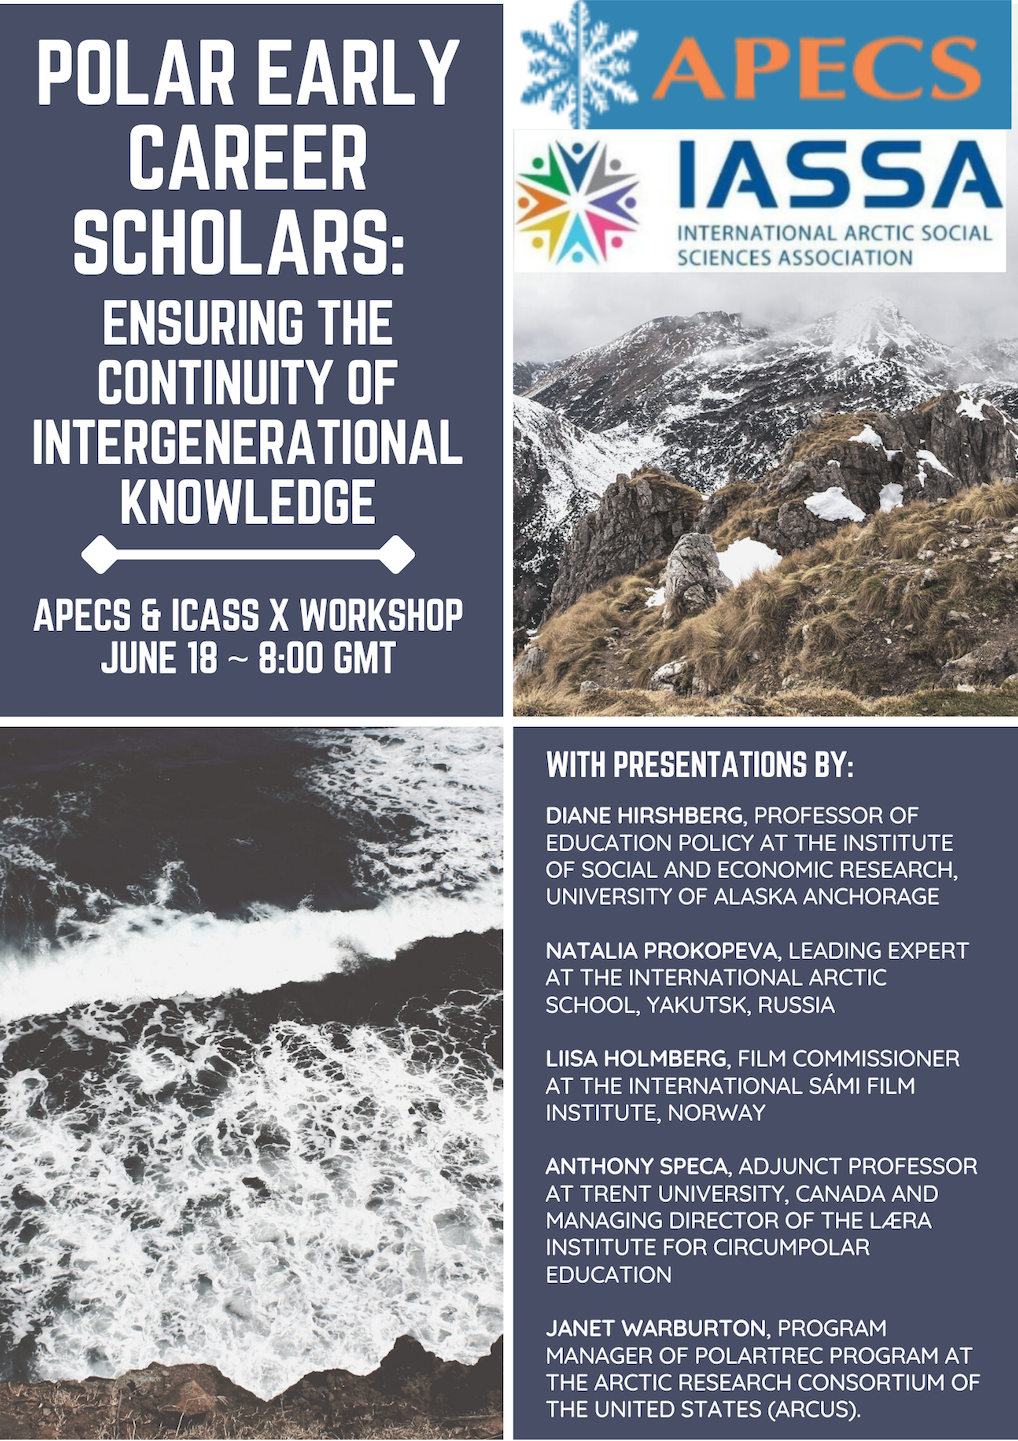 APECS ICASS X Early Career Workshop Flyer